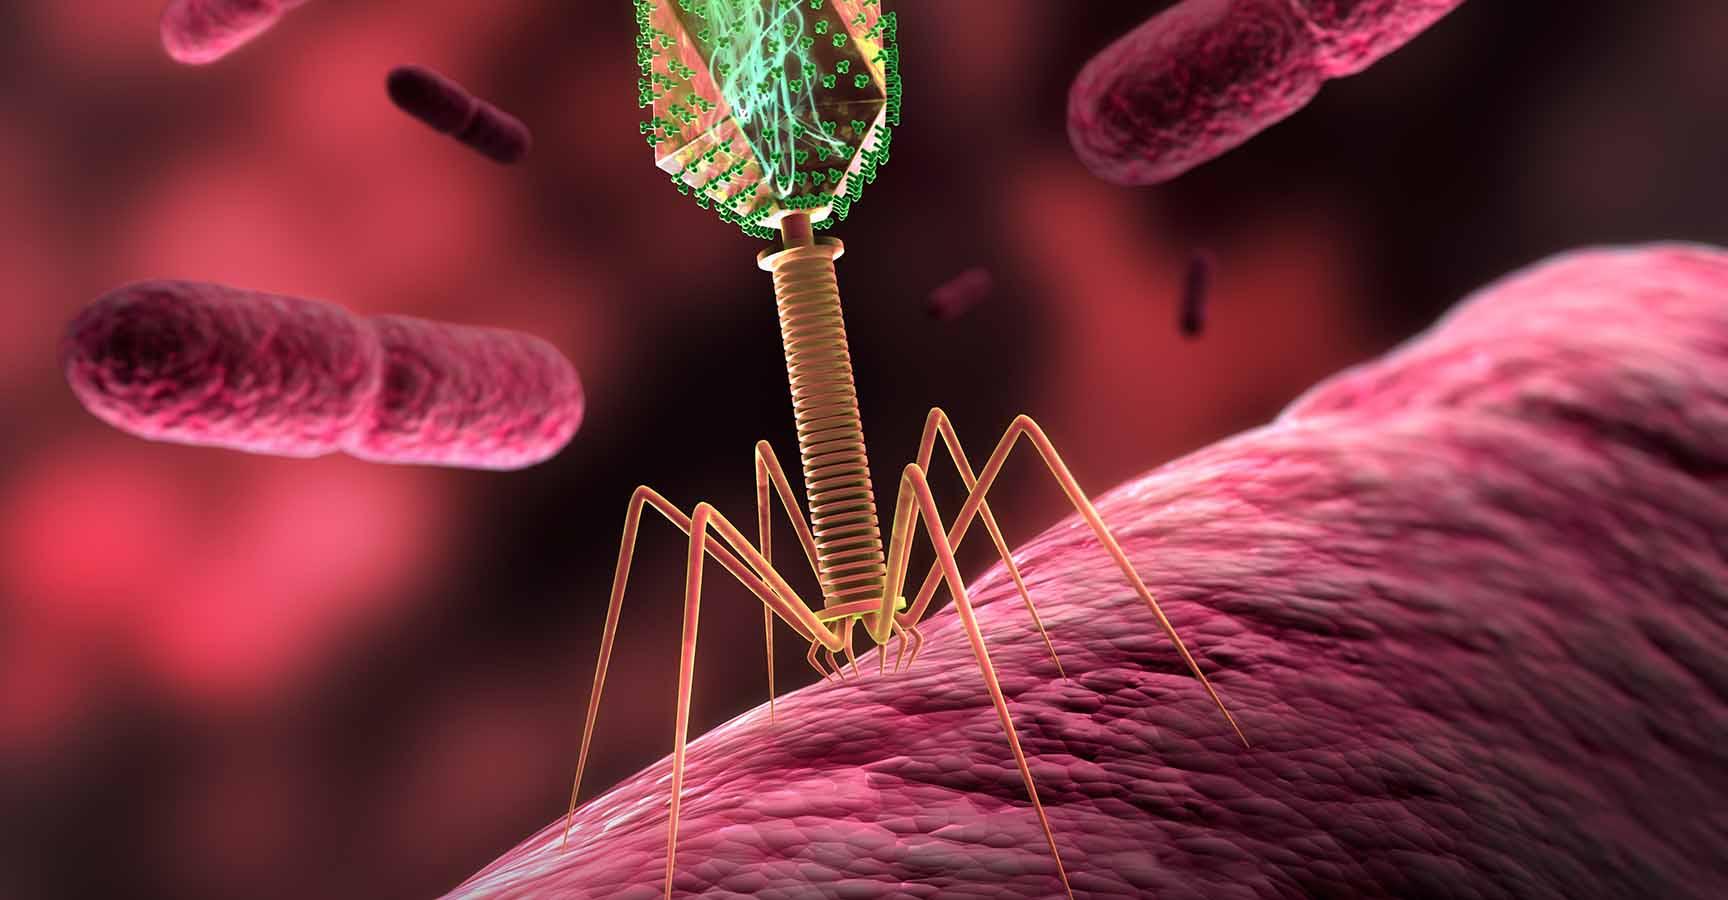 Medical illustration of a bacteriophage infecting bacterium